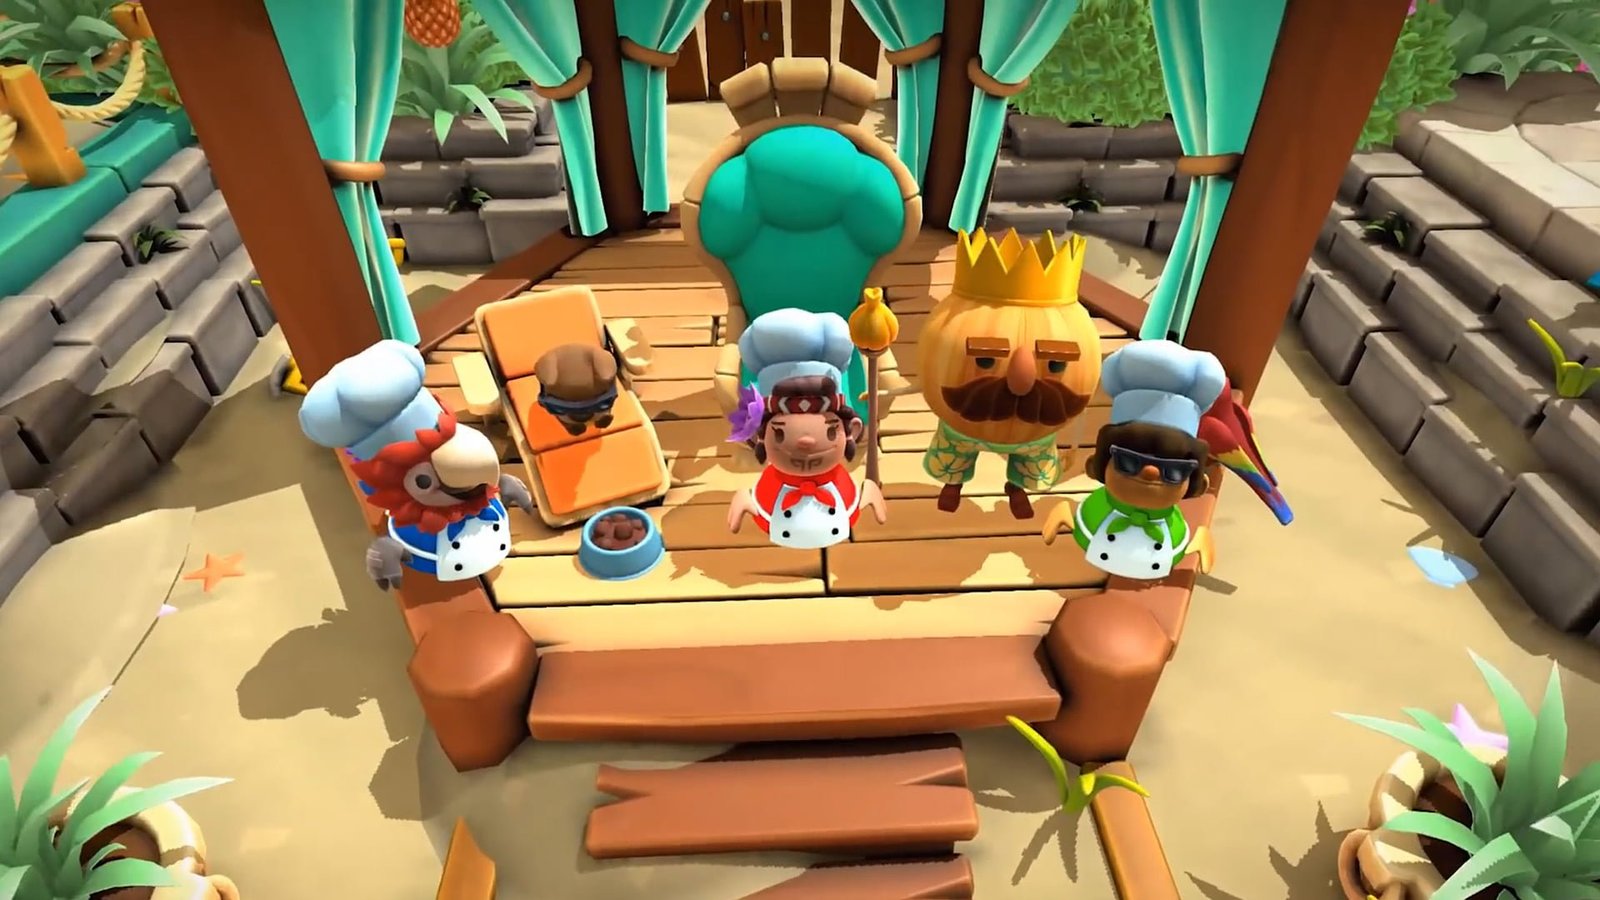 Review – Overcooked 2! Surf ‘n’ Turf